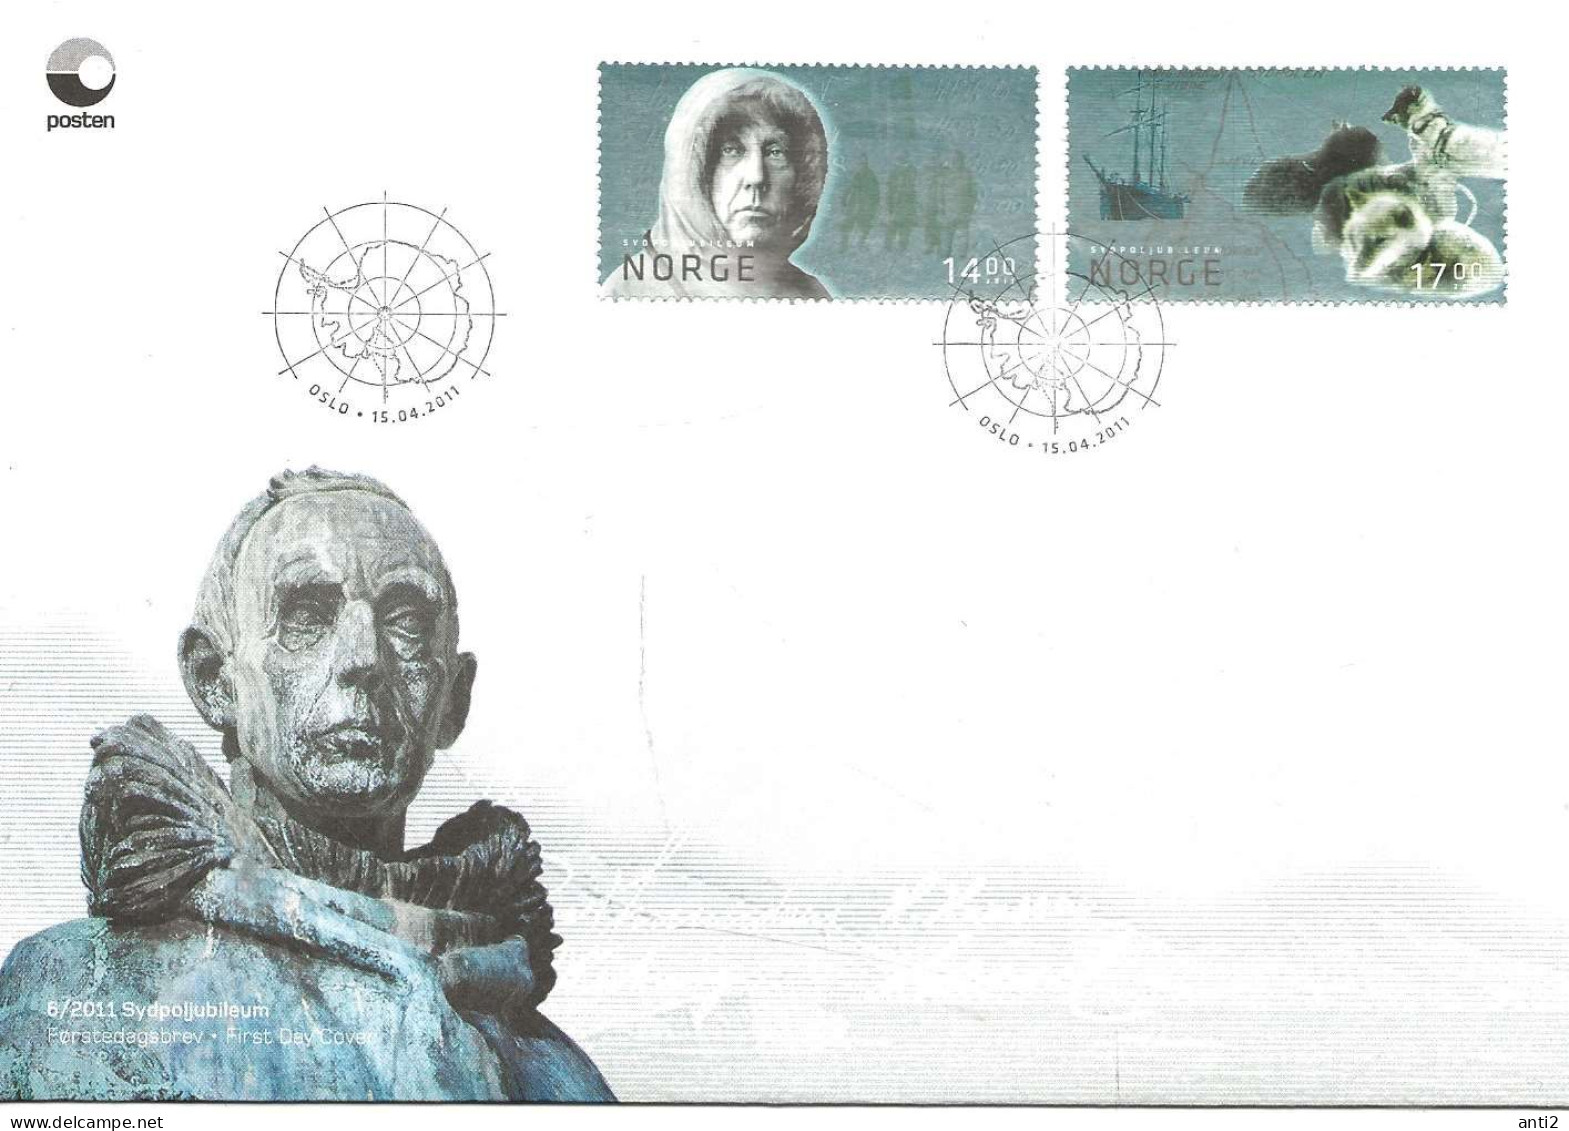 Norge Norway  2011 Entenary Of The Conquest Of The South Pole,  Roald Amundsen (1872-1928), Polar Explorer,  FDC - Covers & Documents